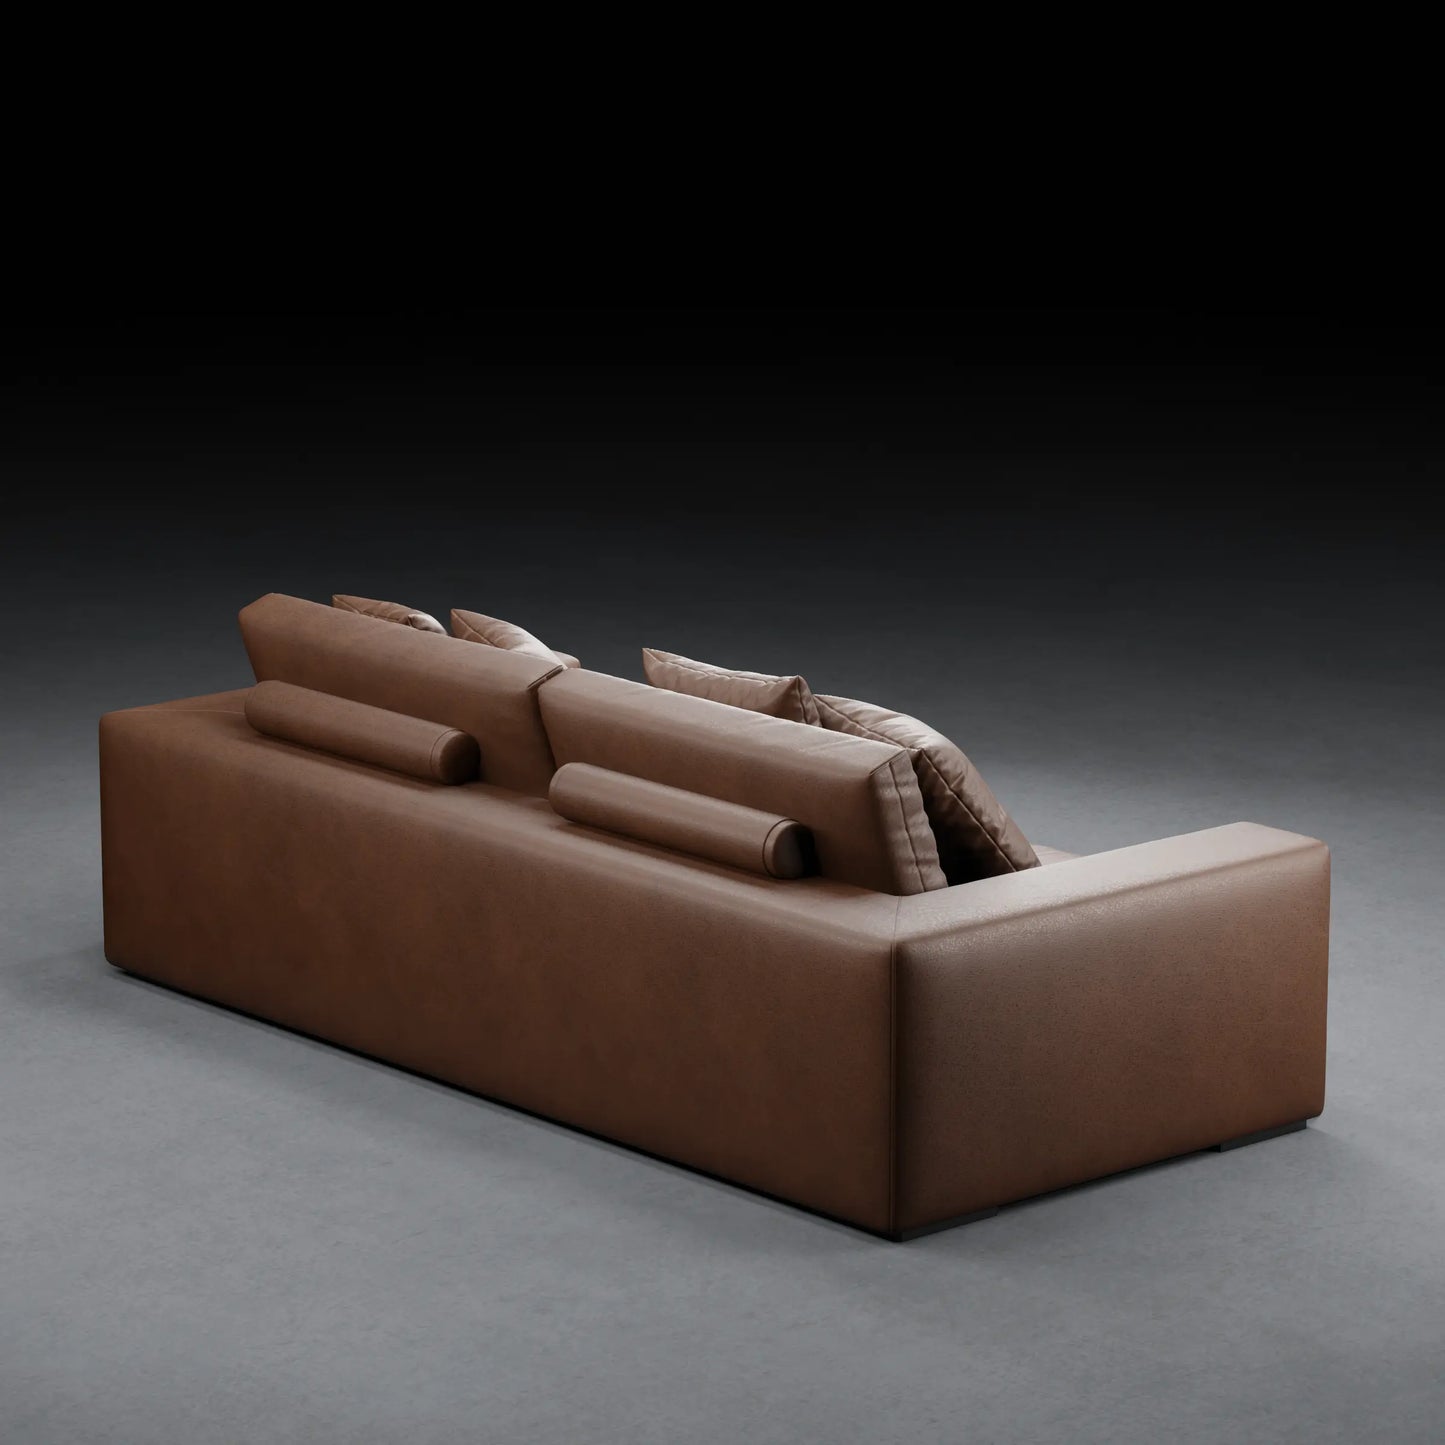 IVY - XL 2 Seater Couch in Leather Finish | Brown Color